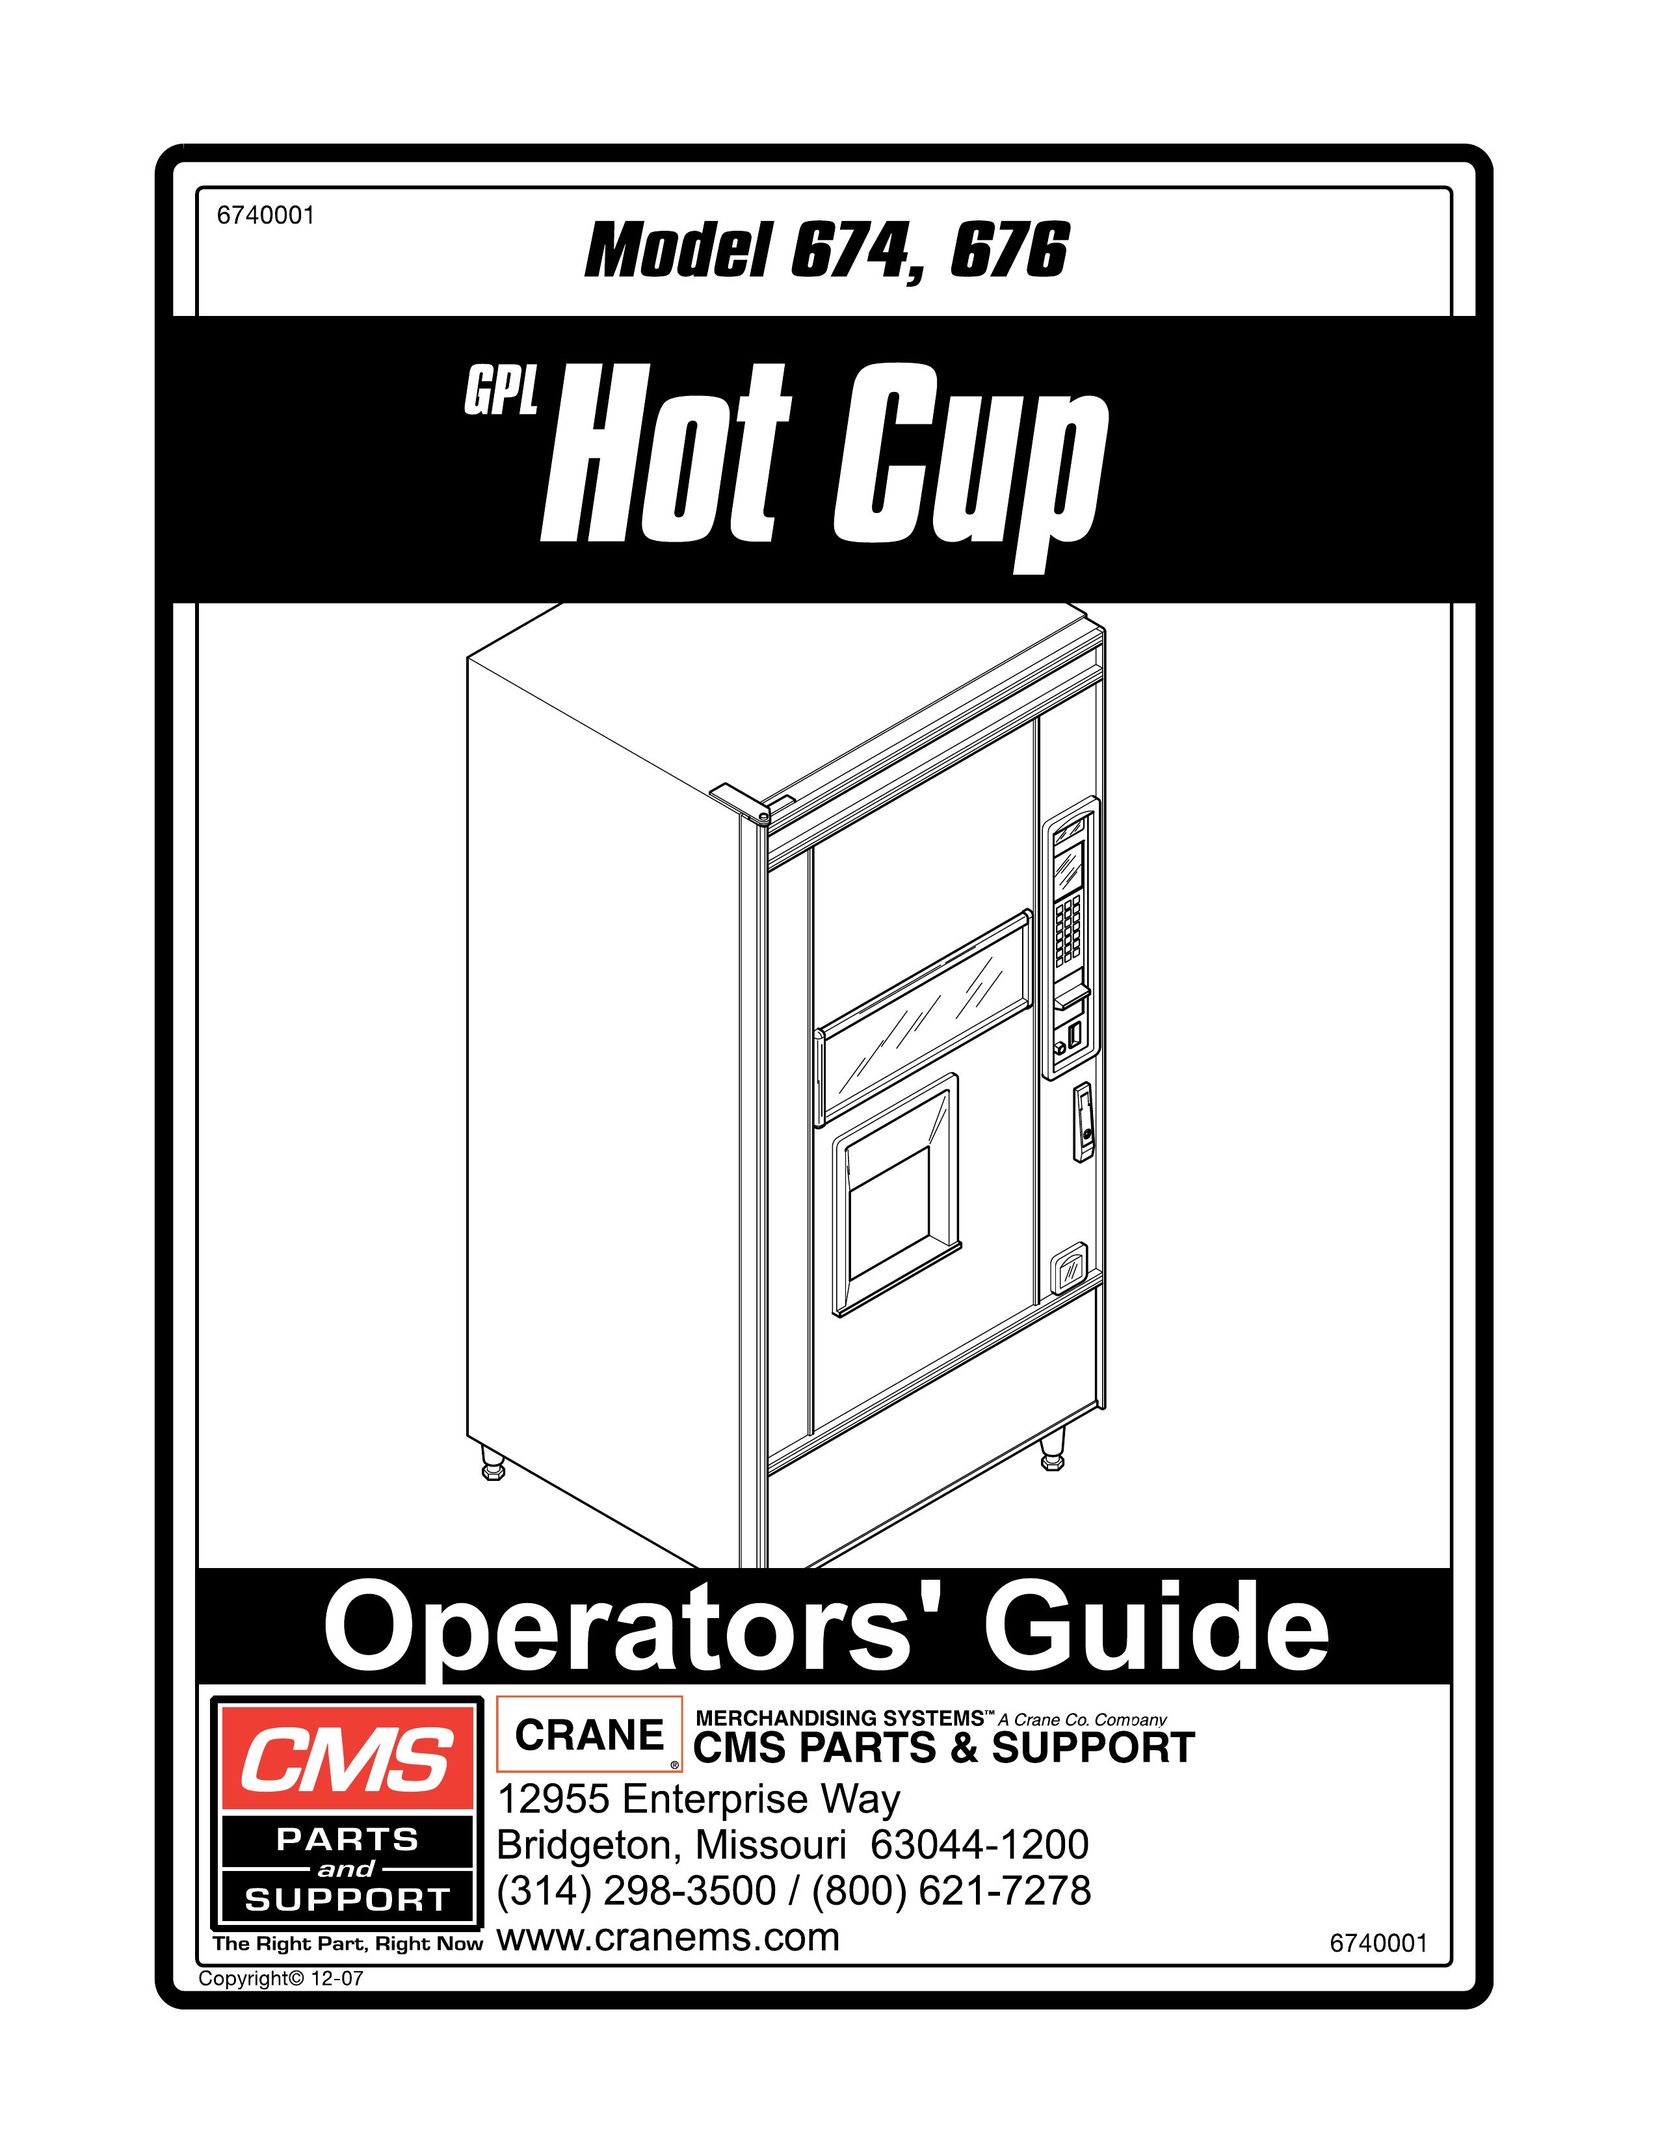 CMS Products 674 Coffeemaker User Manual